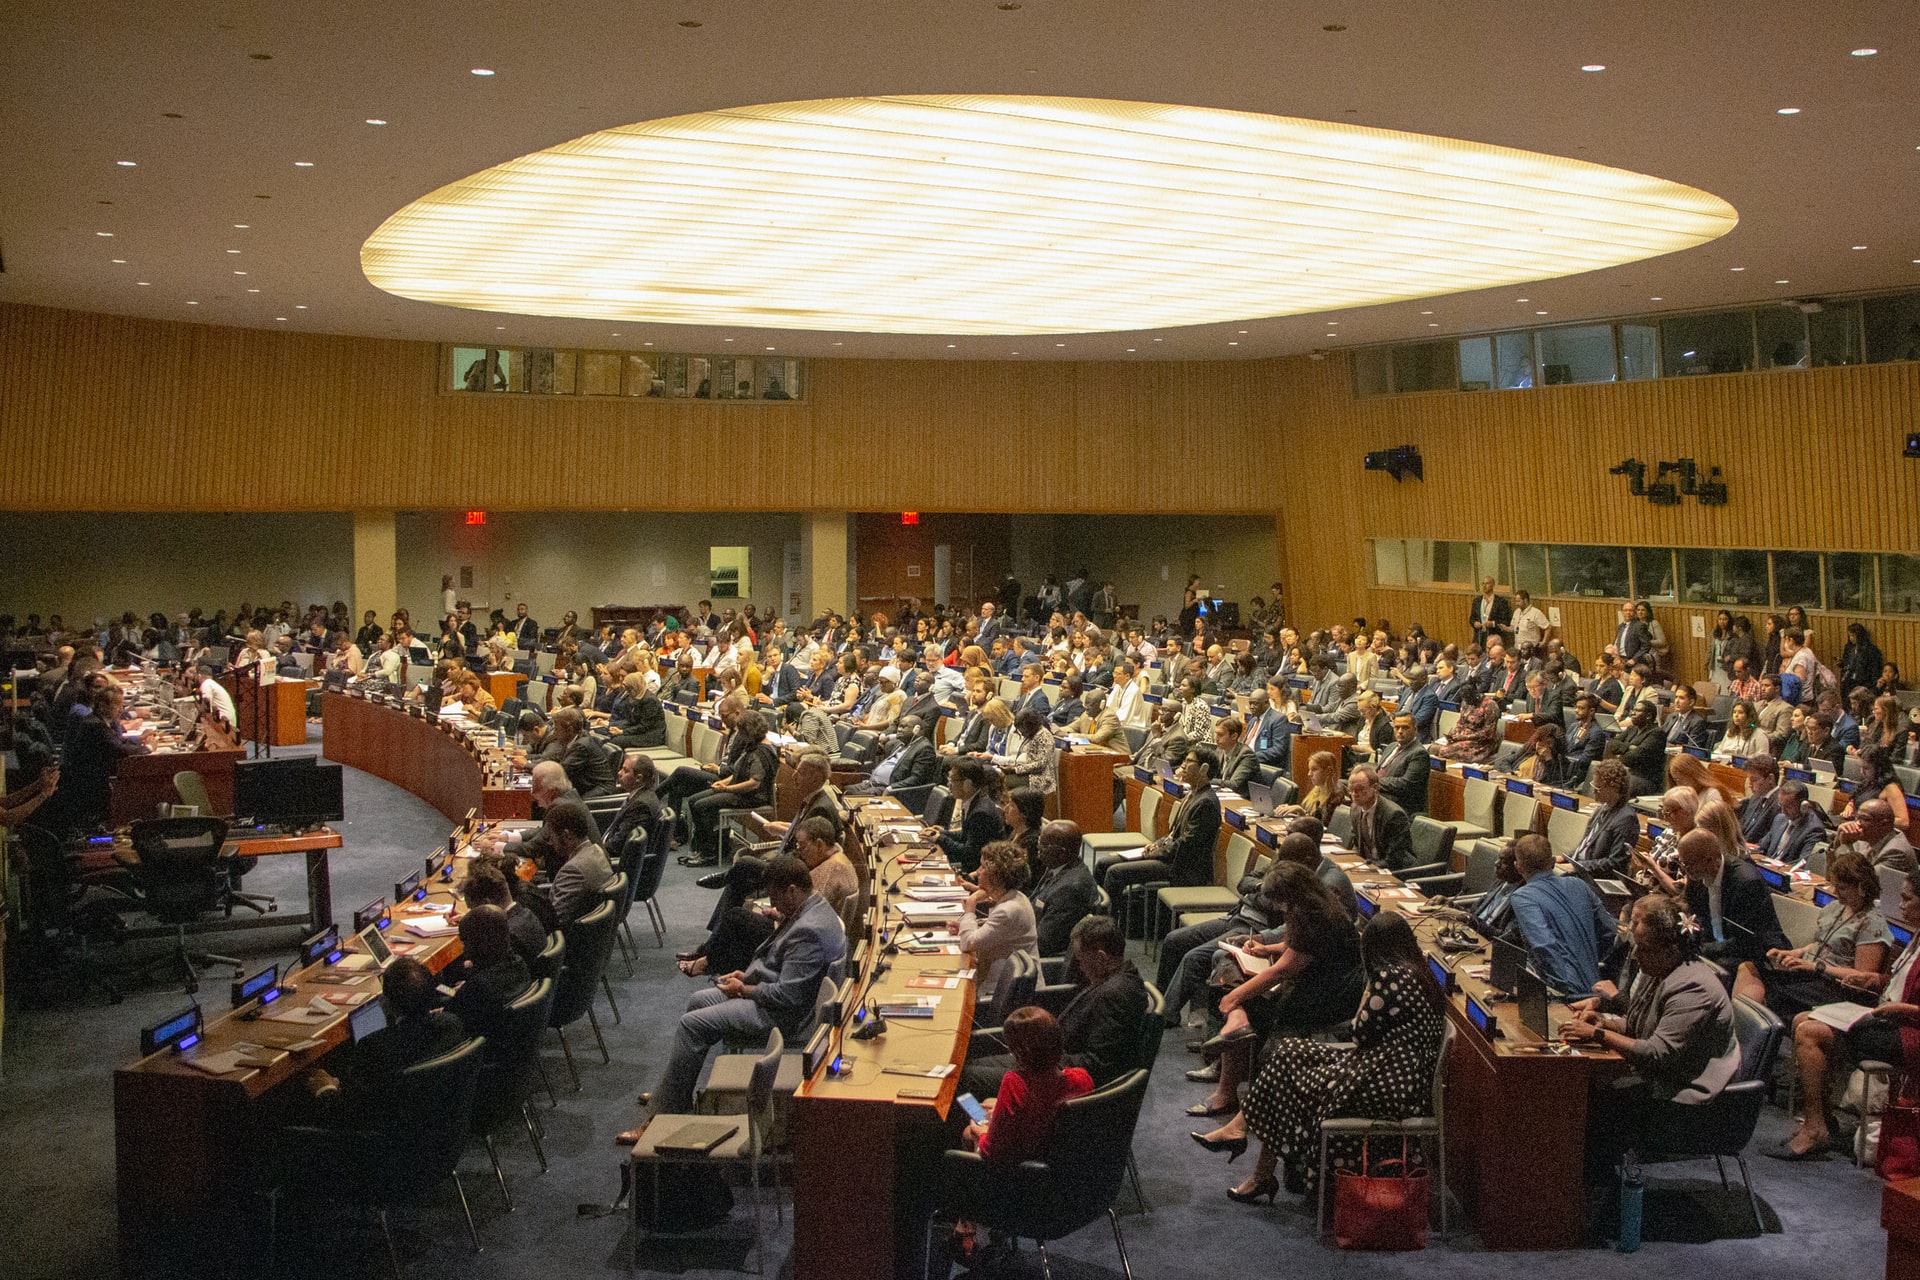 SDG Targets. Delegates from around the world gather at the UN High-level Political Forum on Sustainable Development, 9 July 2019, Photo by Matthew TenBruggencate on Unsplash